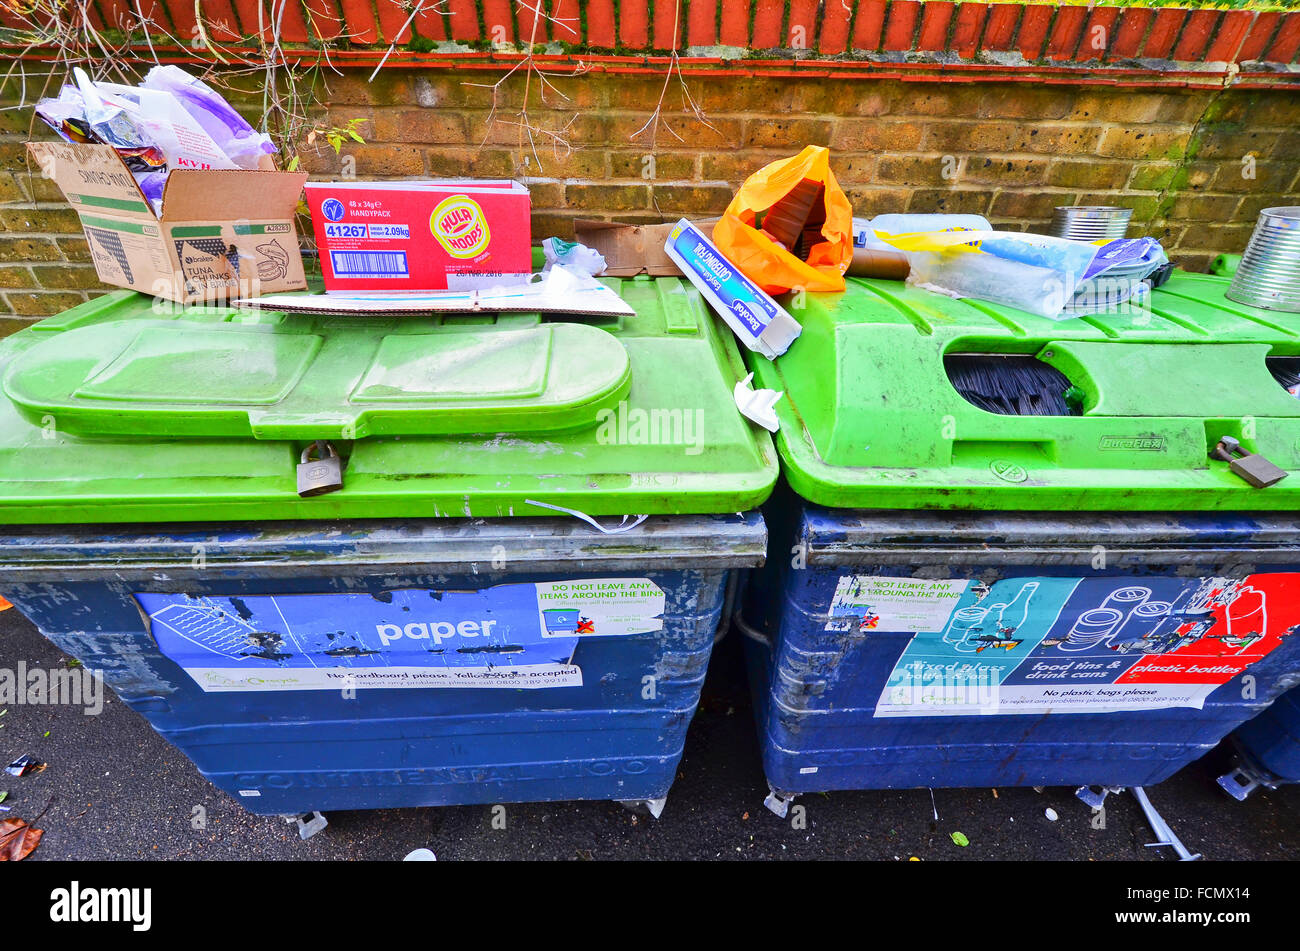 Rubbish left on top of recycle bins Wanstead, London E11 Stock Photo